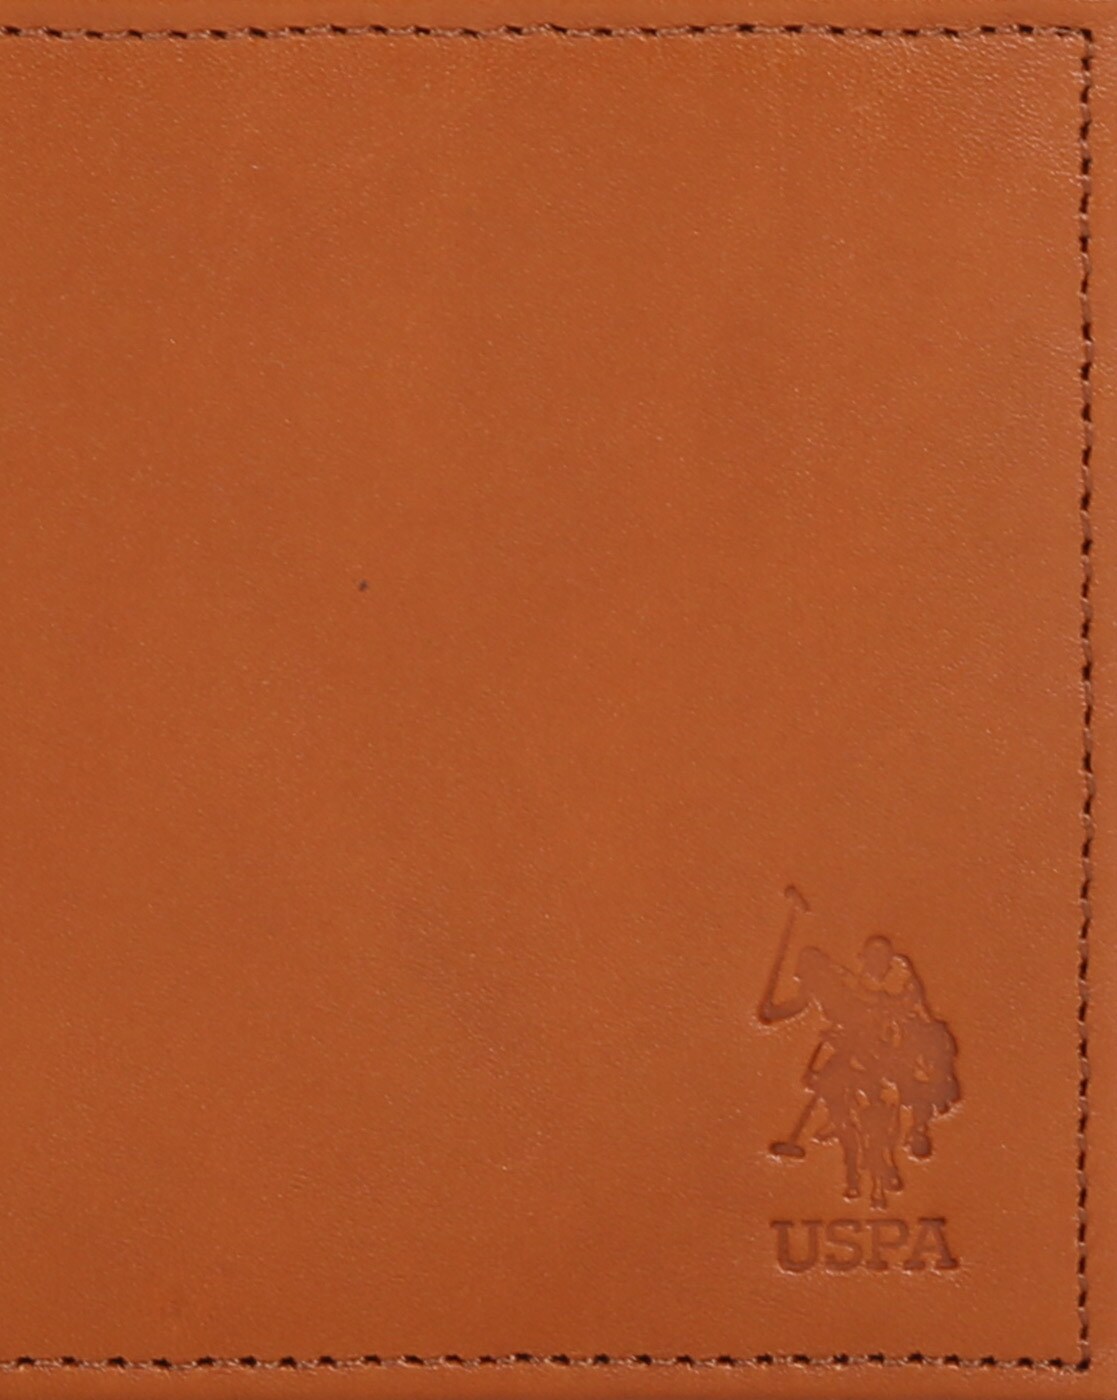 U.S. Polo Assn. Bi-Fold Wallet with Logo Embossed For Men (Brown, OS)